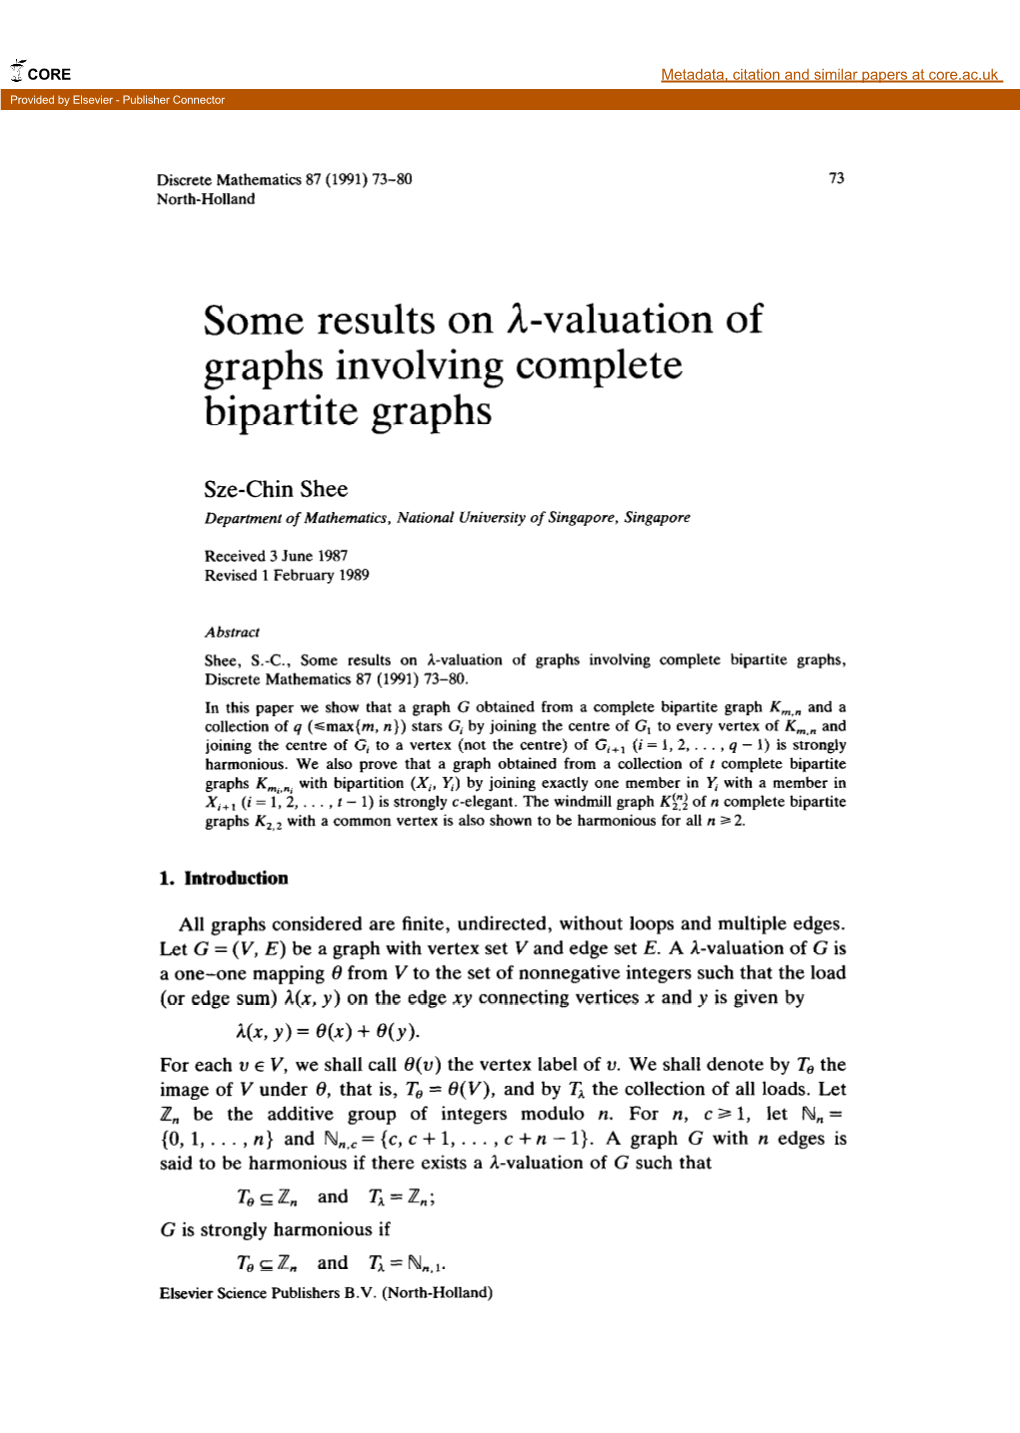 Some Results on A-Valuation of Graphs Involving Complete Bipartite Graphs